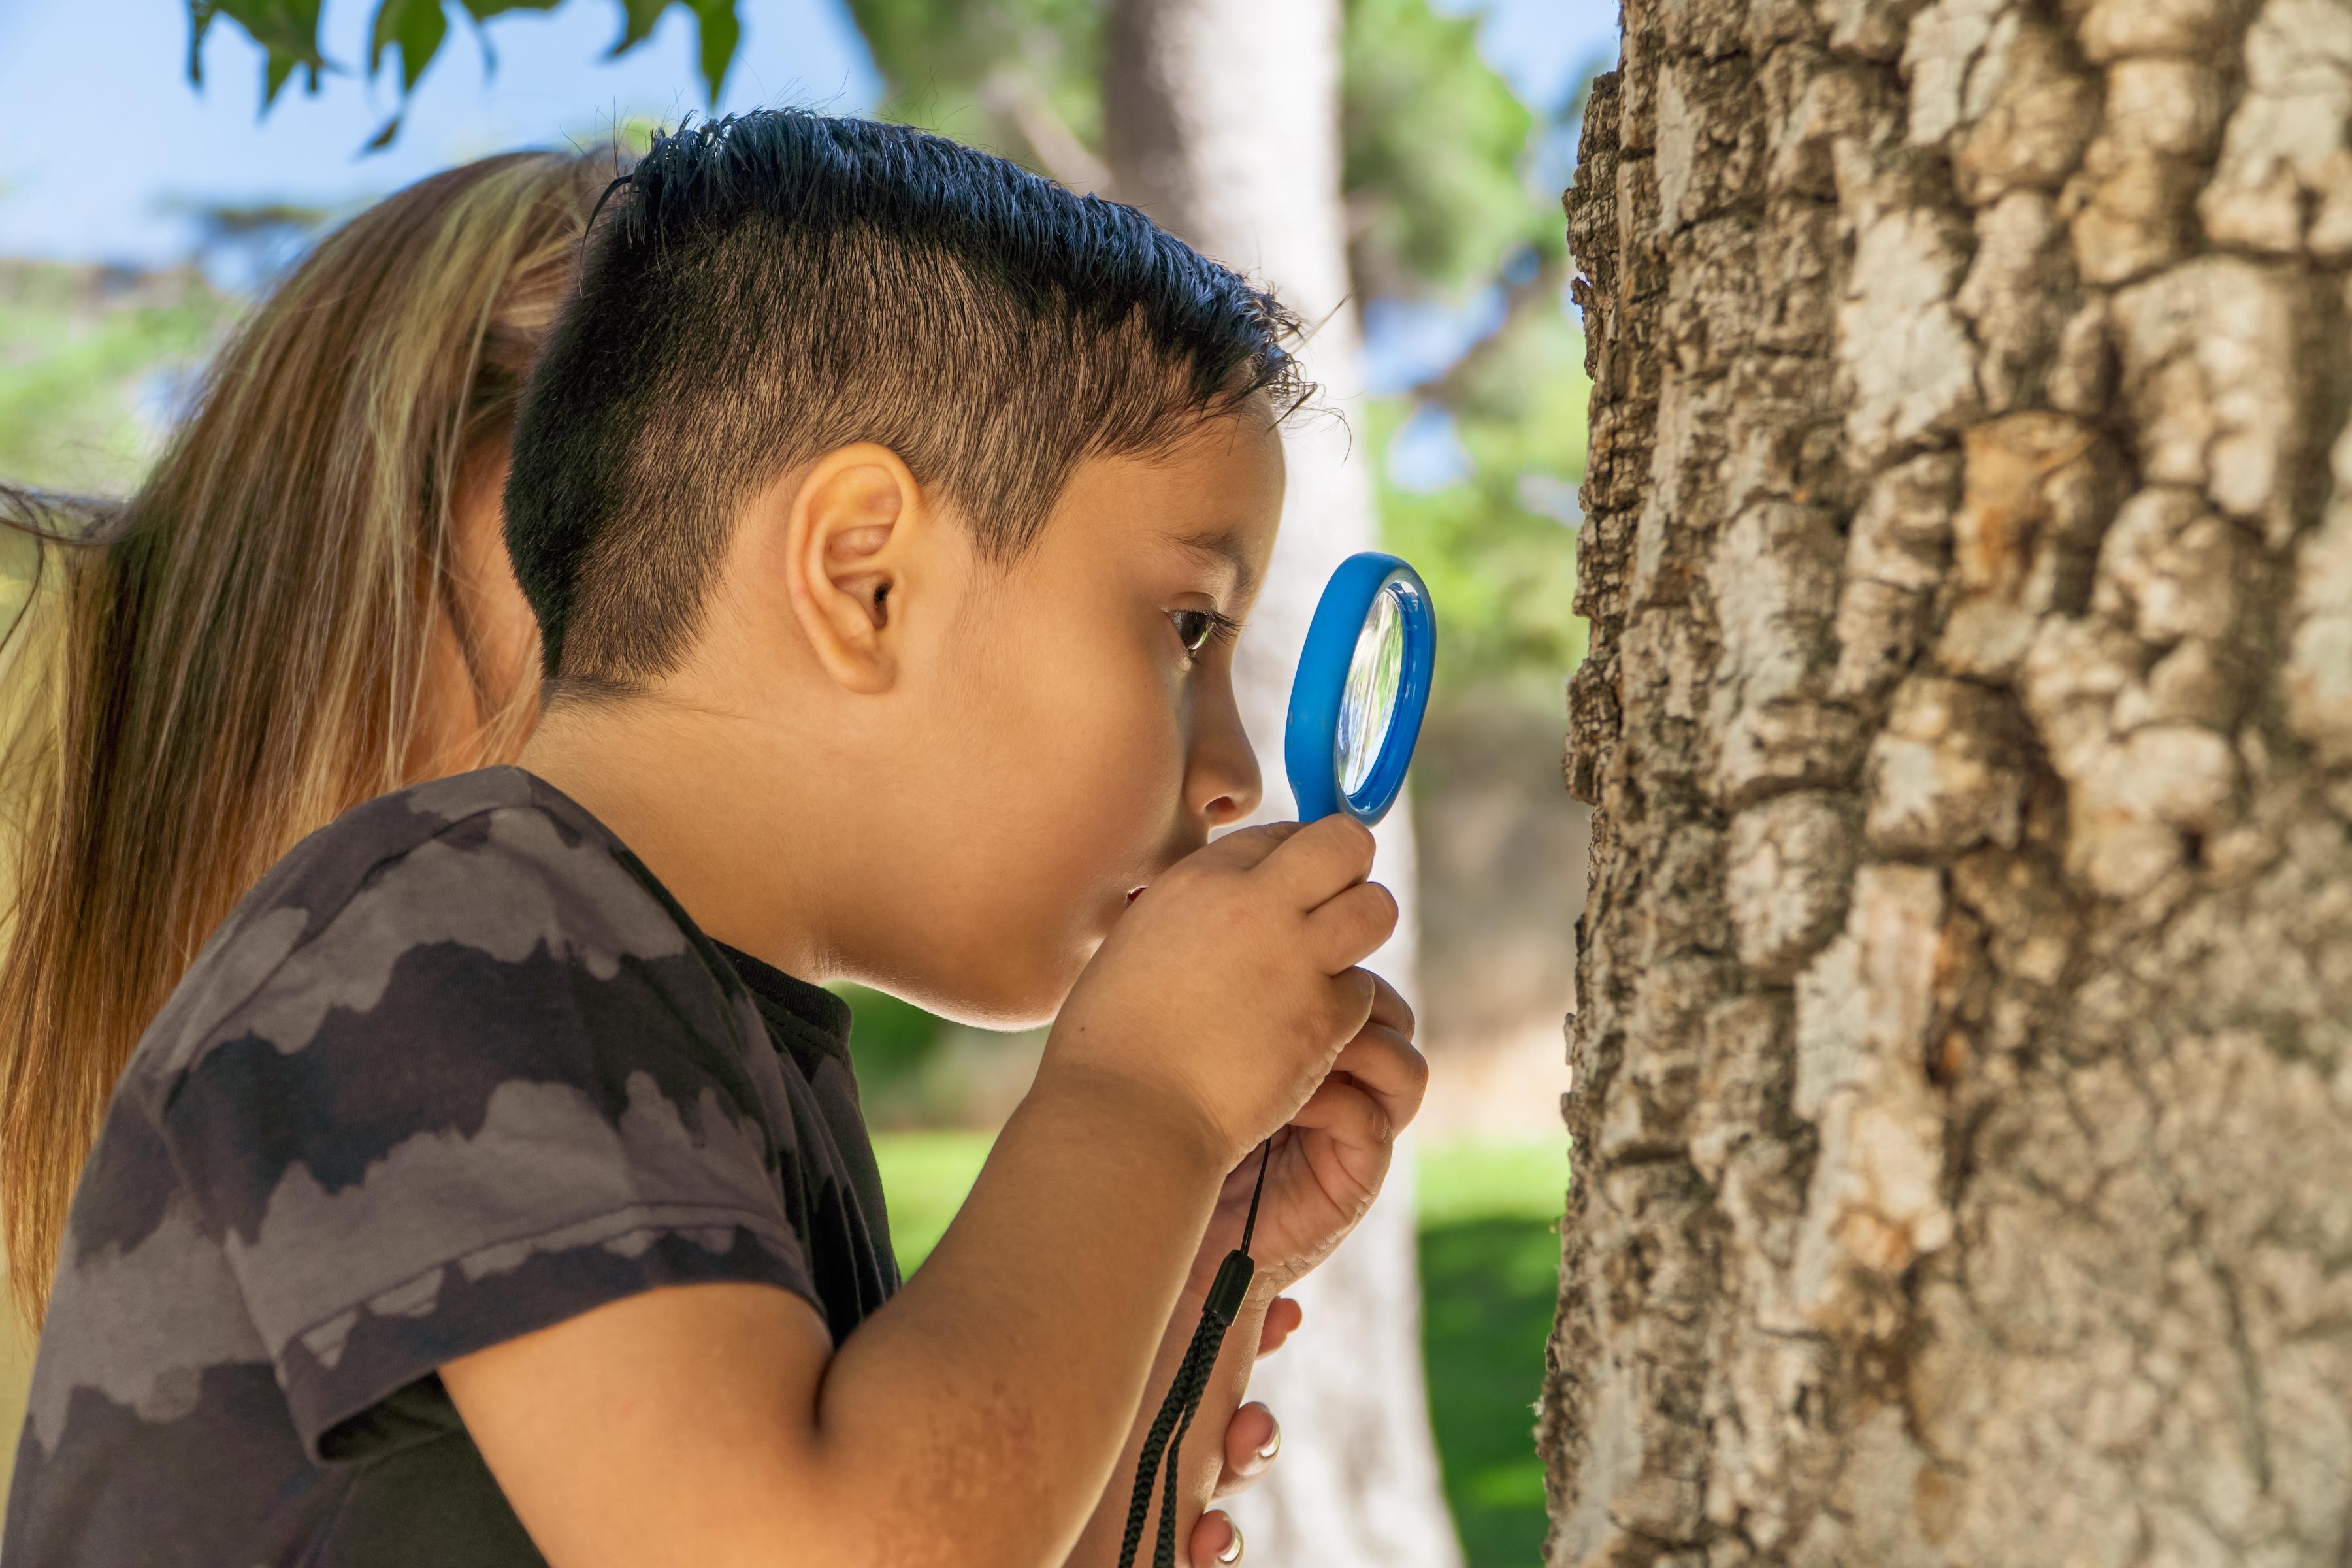 young boy with magnifying glass studies the bark of a tree